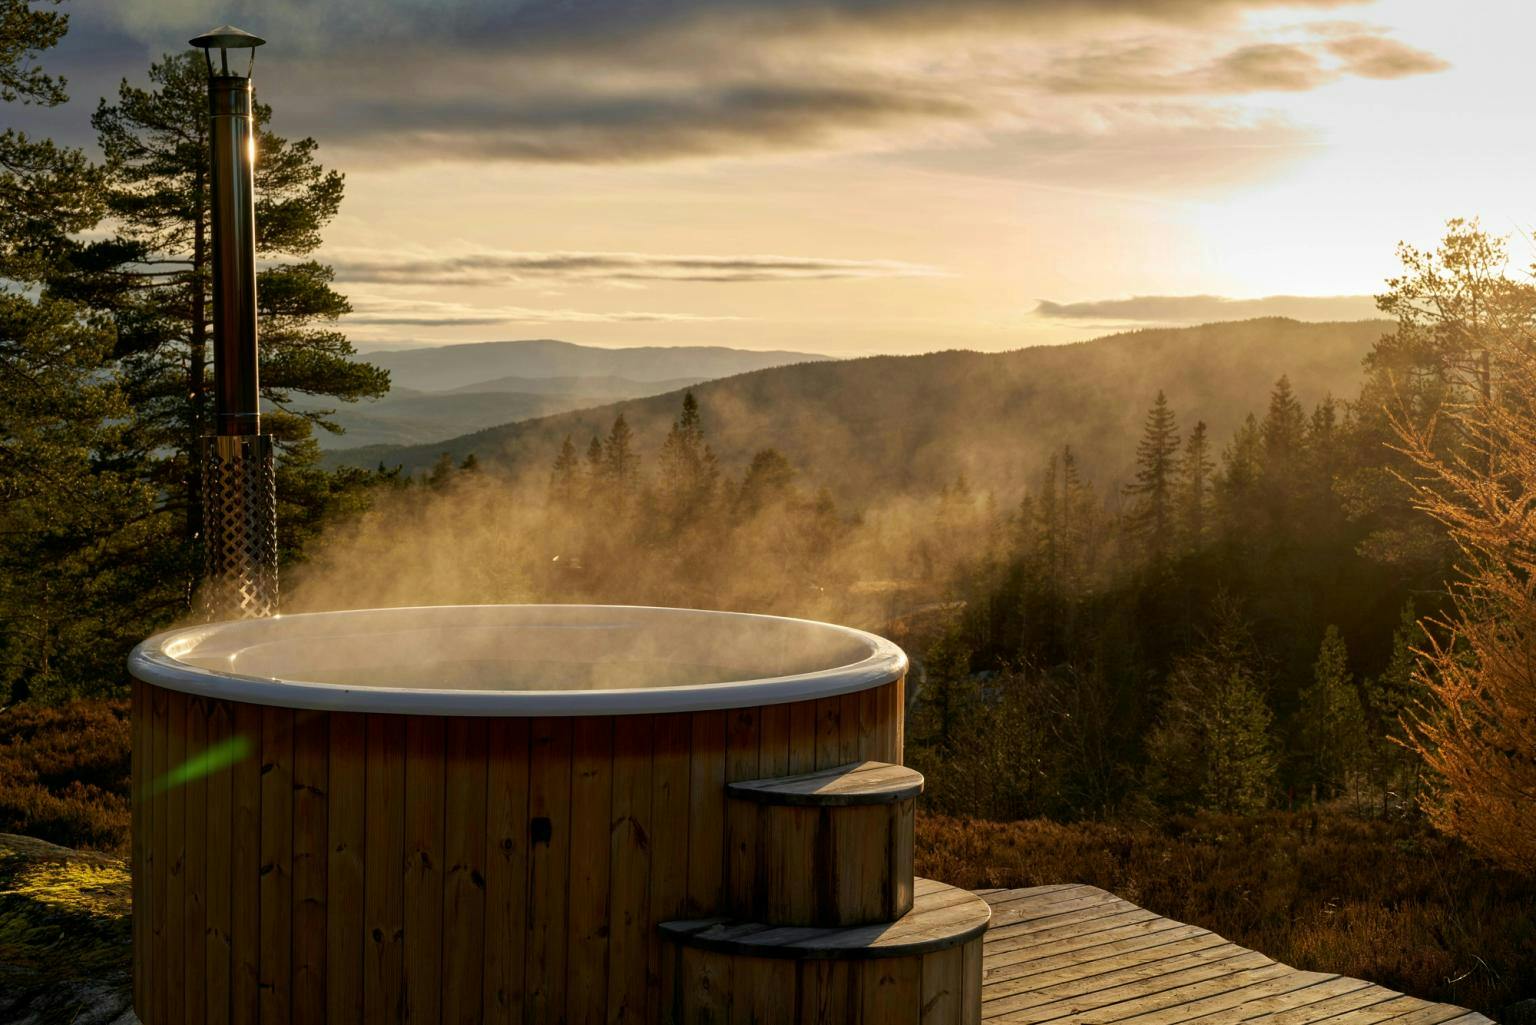 Image of a hot tub steaming at dusk overlooking a forest